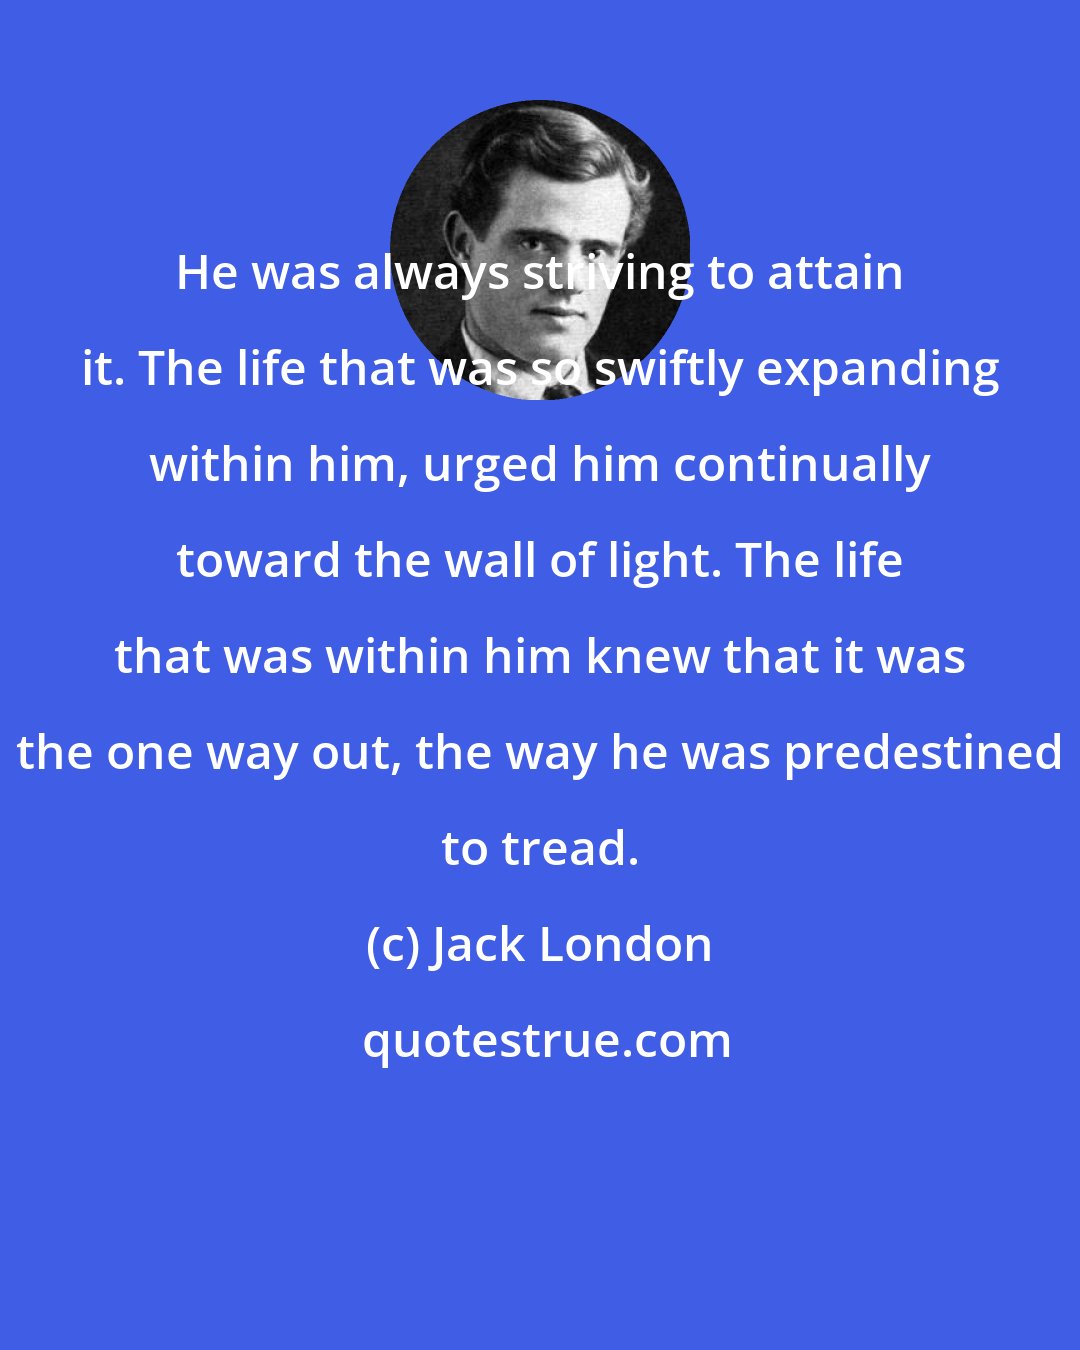 Jack London: He was always striving to attain it. The life that was so swiftly expanding within him, urged him continually toward the wall of light. The life that was within him knew that it was the one way out, the way he was predestined to tread.